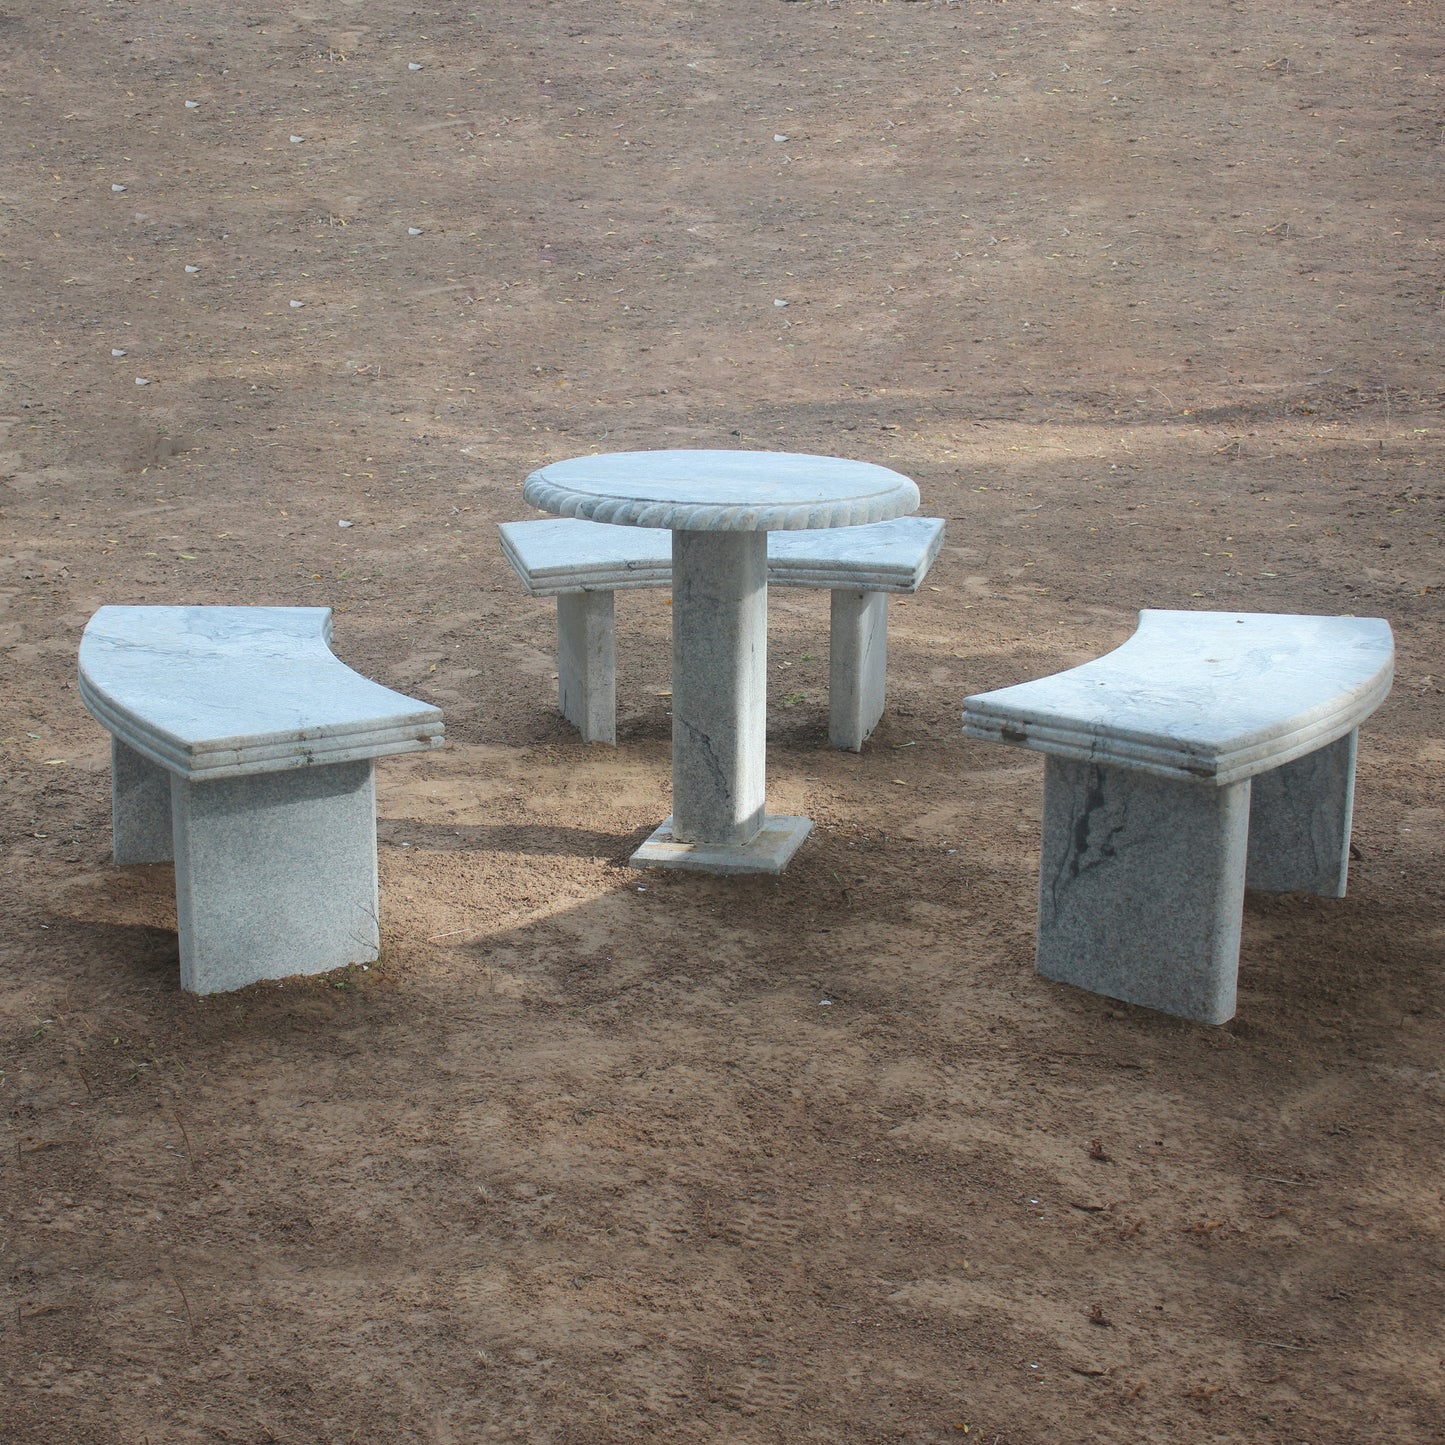 Circular Teapoy with 3 Curved Granite Stone Park Benches | Outdoor Ensemble | Granite Stone Park Set | Relaxing Outdoor Seating